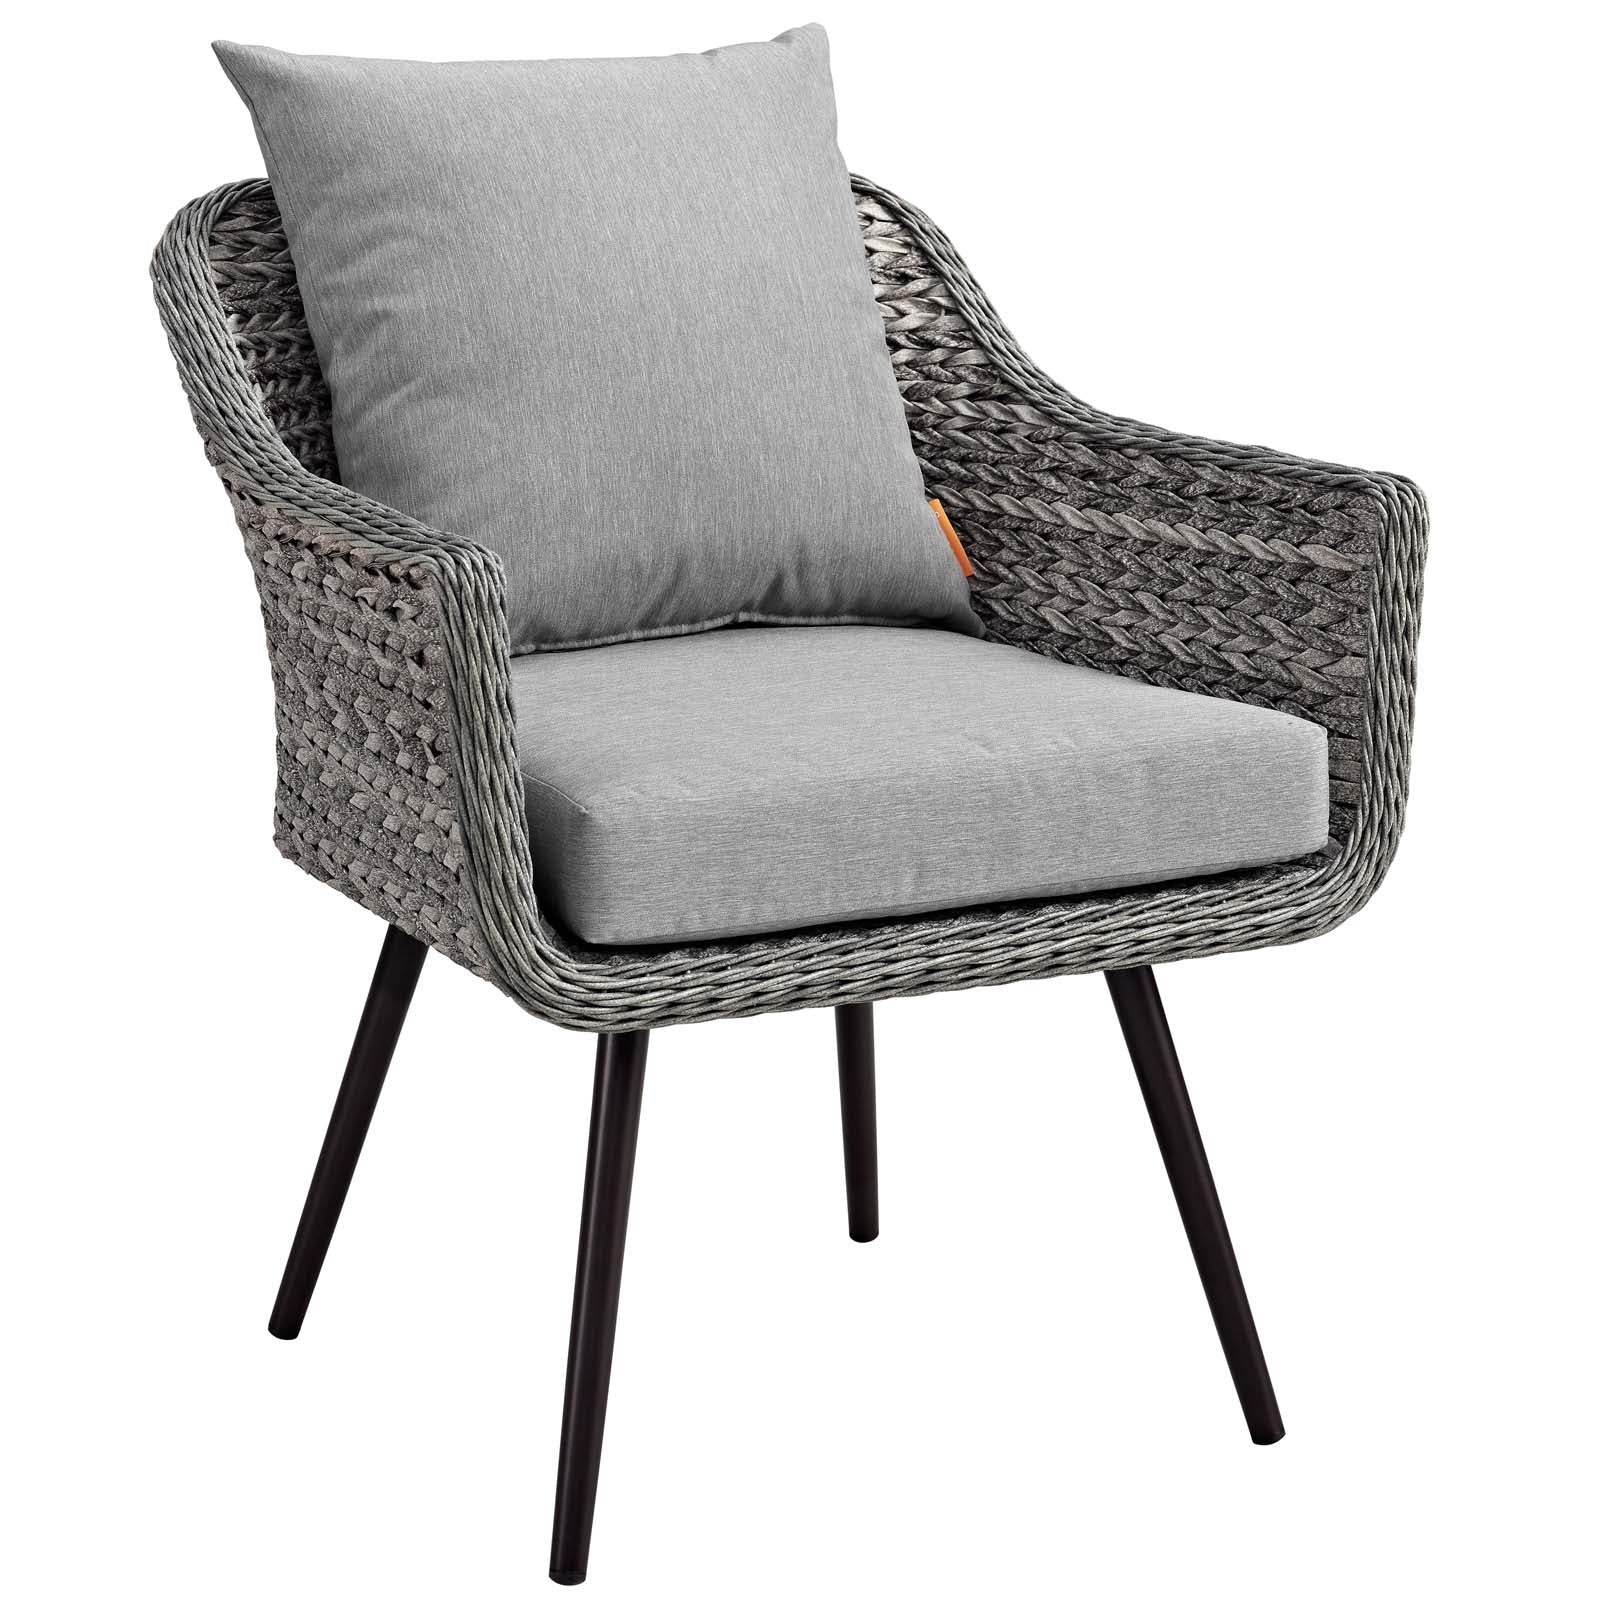 Endeavor 3 Piece Outdoor Patio Wicker Rattan Loveseat and Armchair Set - East Shore Modern Home Furnishings